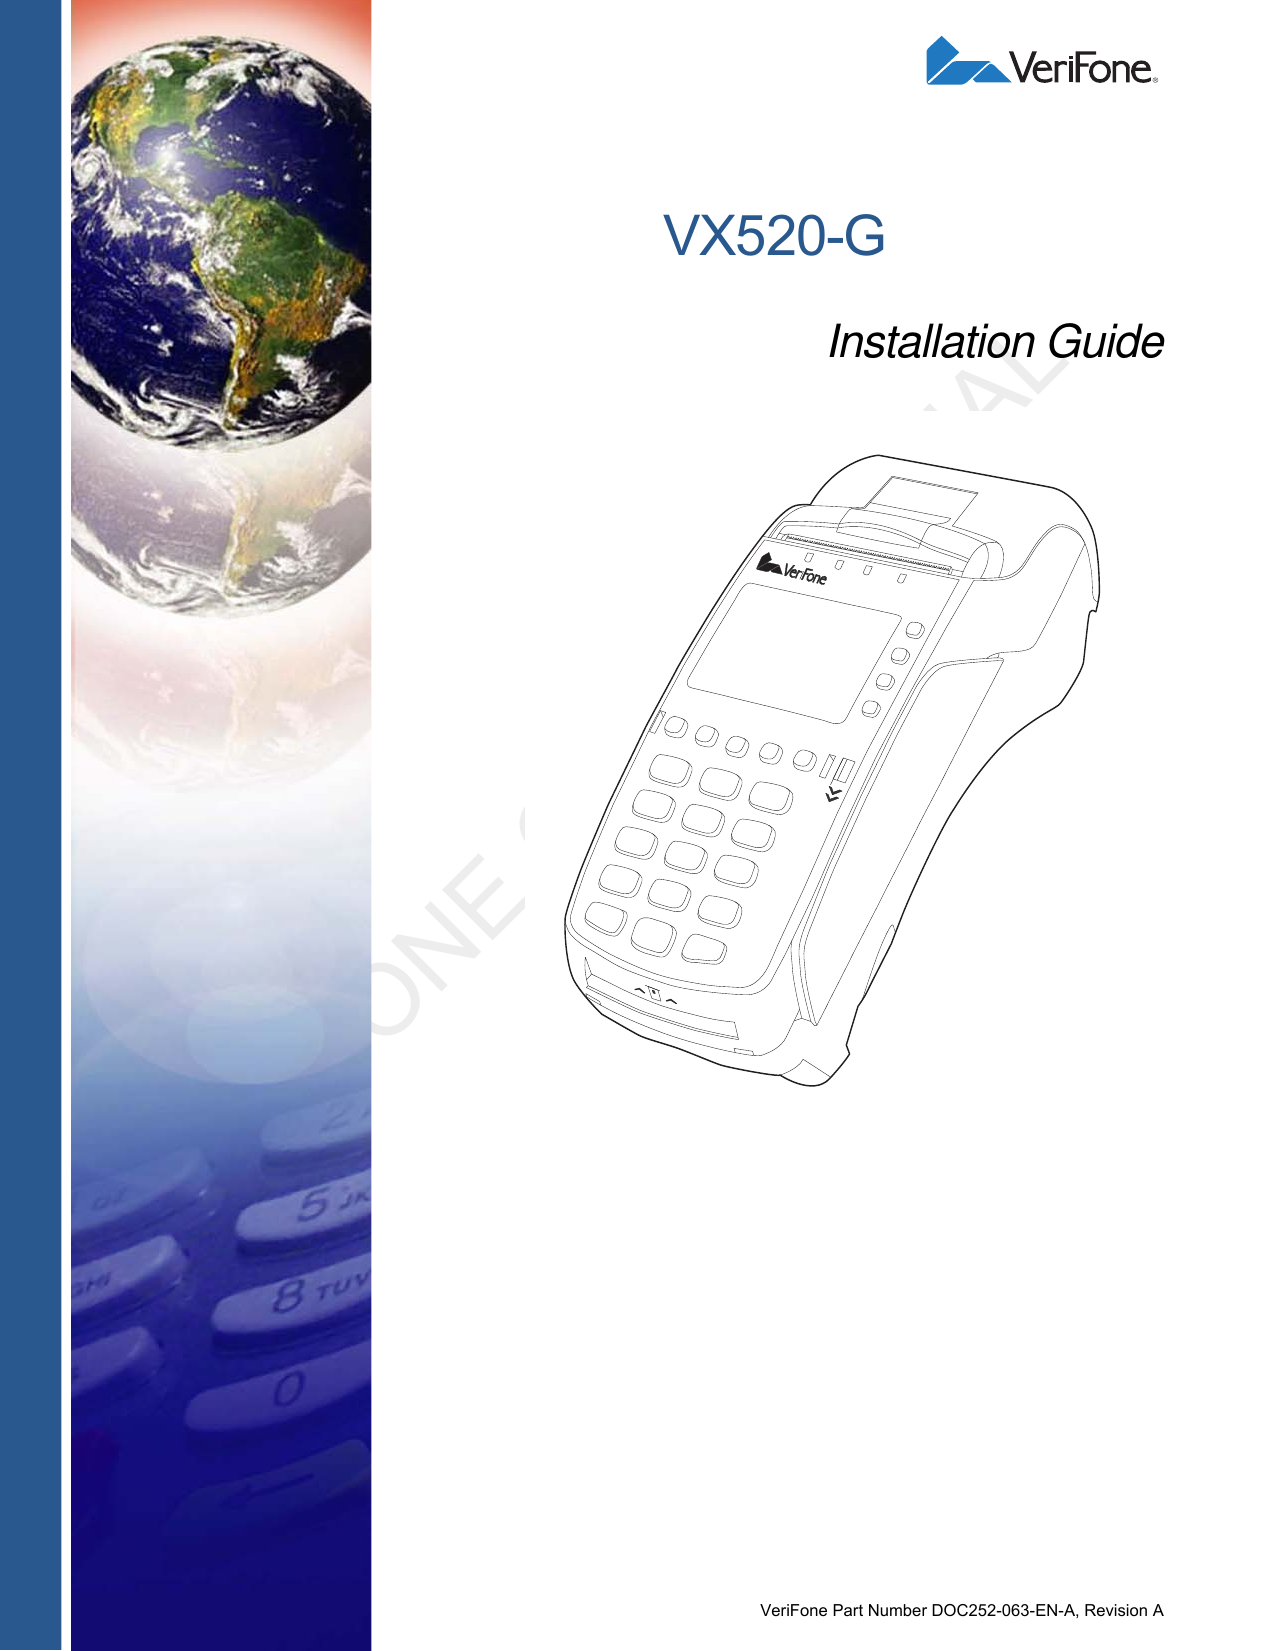 Verifone VX520-G POINT OF SALE TERMINAL User Manual